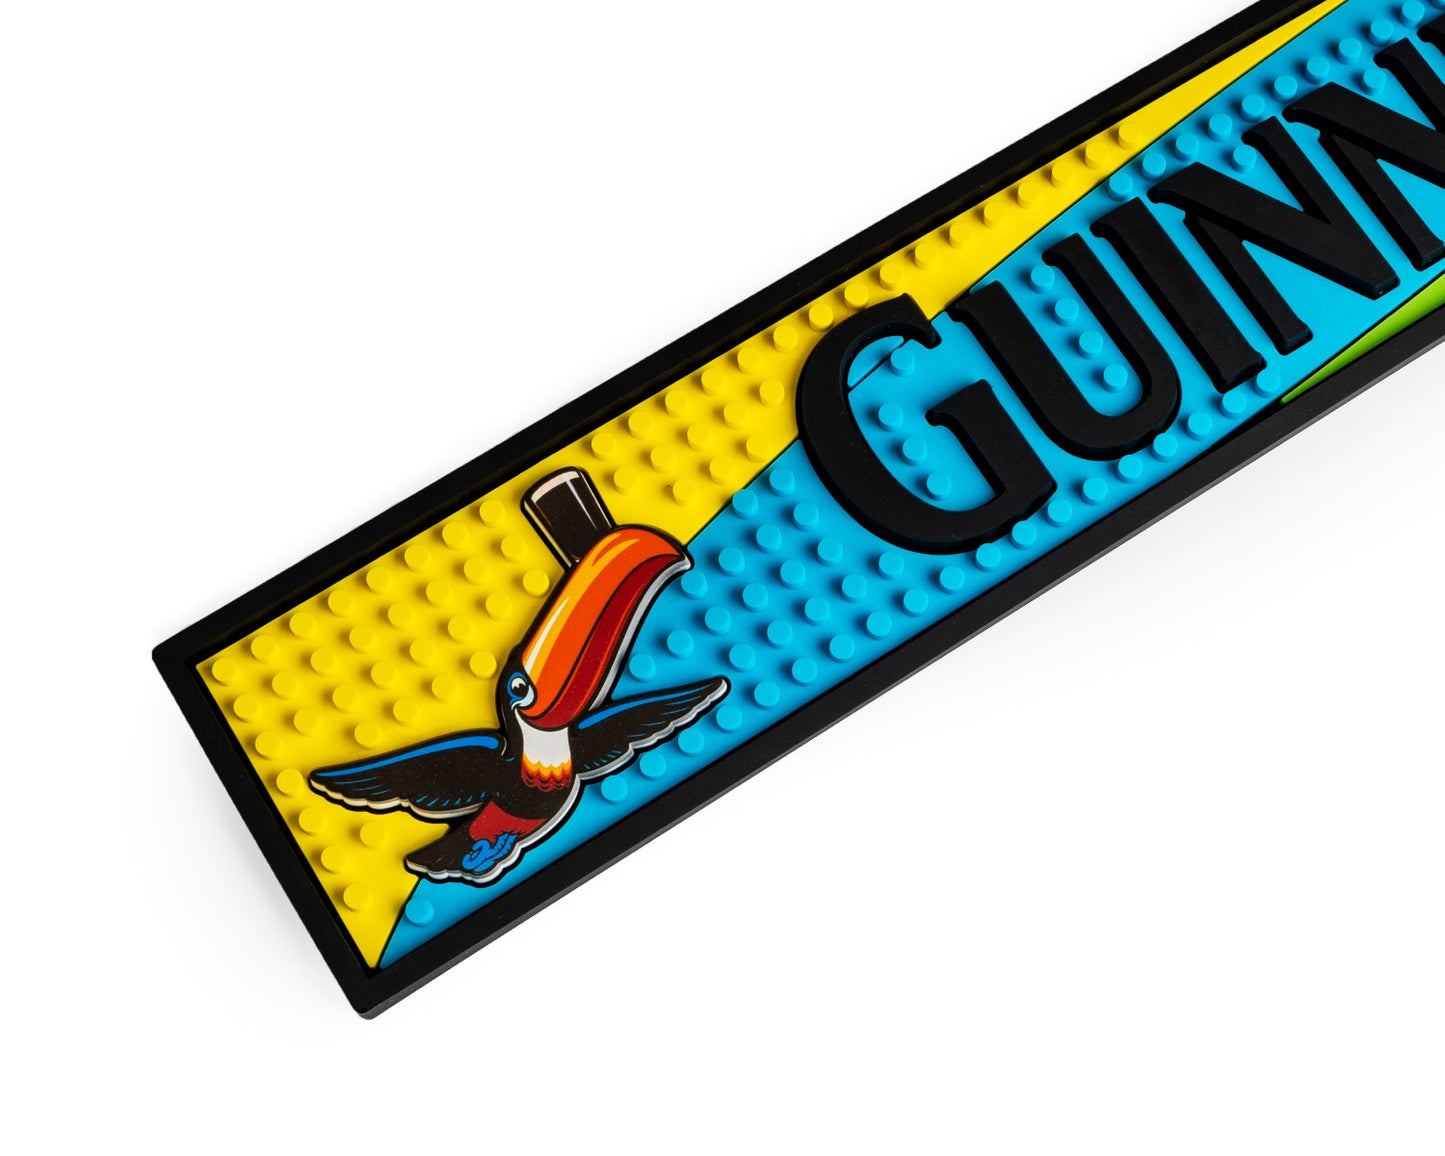 Guinness UK branded Guinness Toucan PVC bar mat, perfect for creating a pub-feel in your home bar.